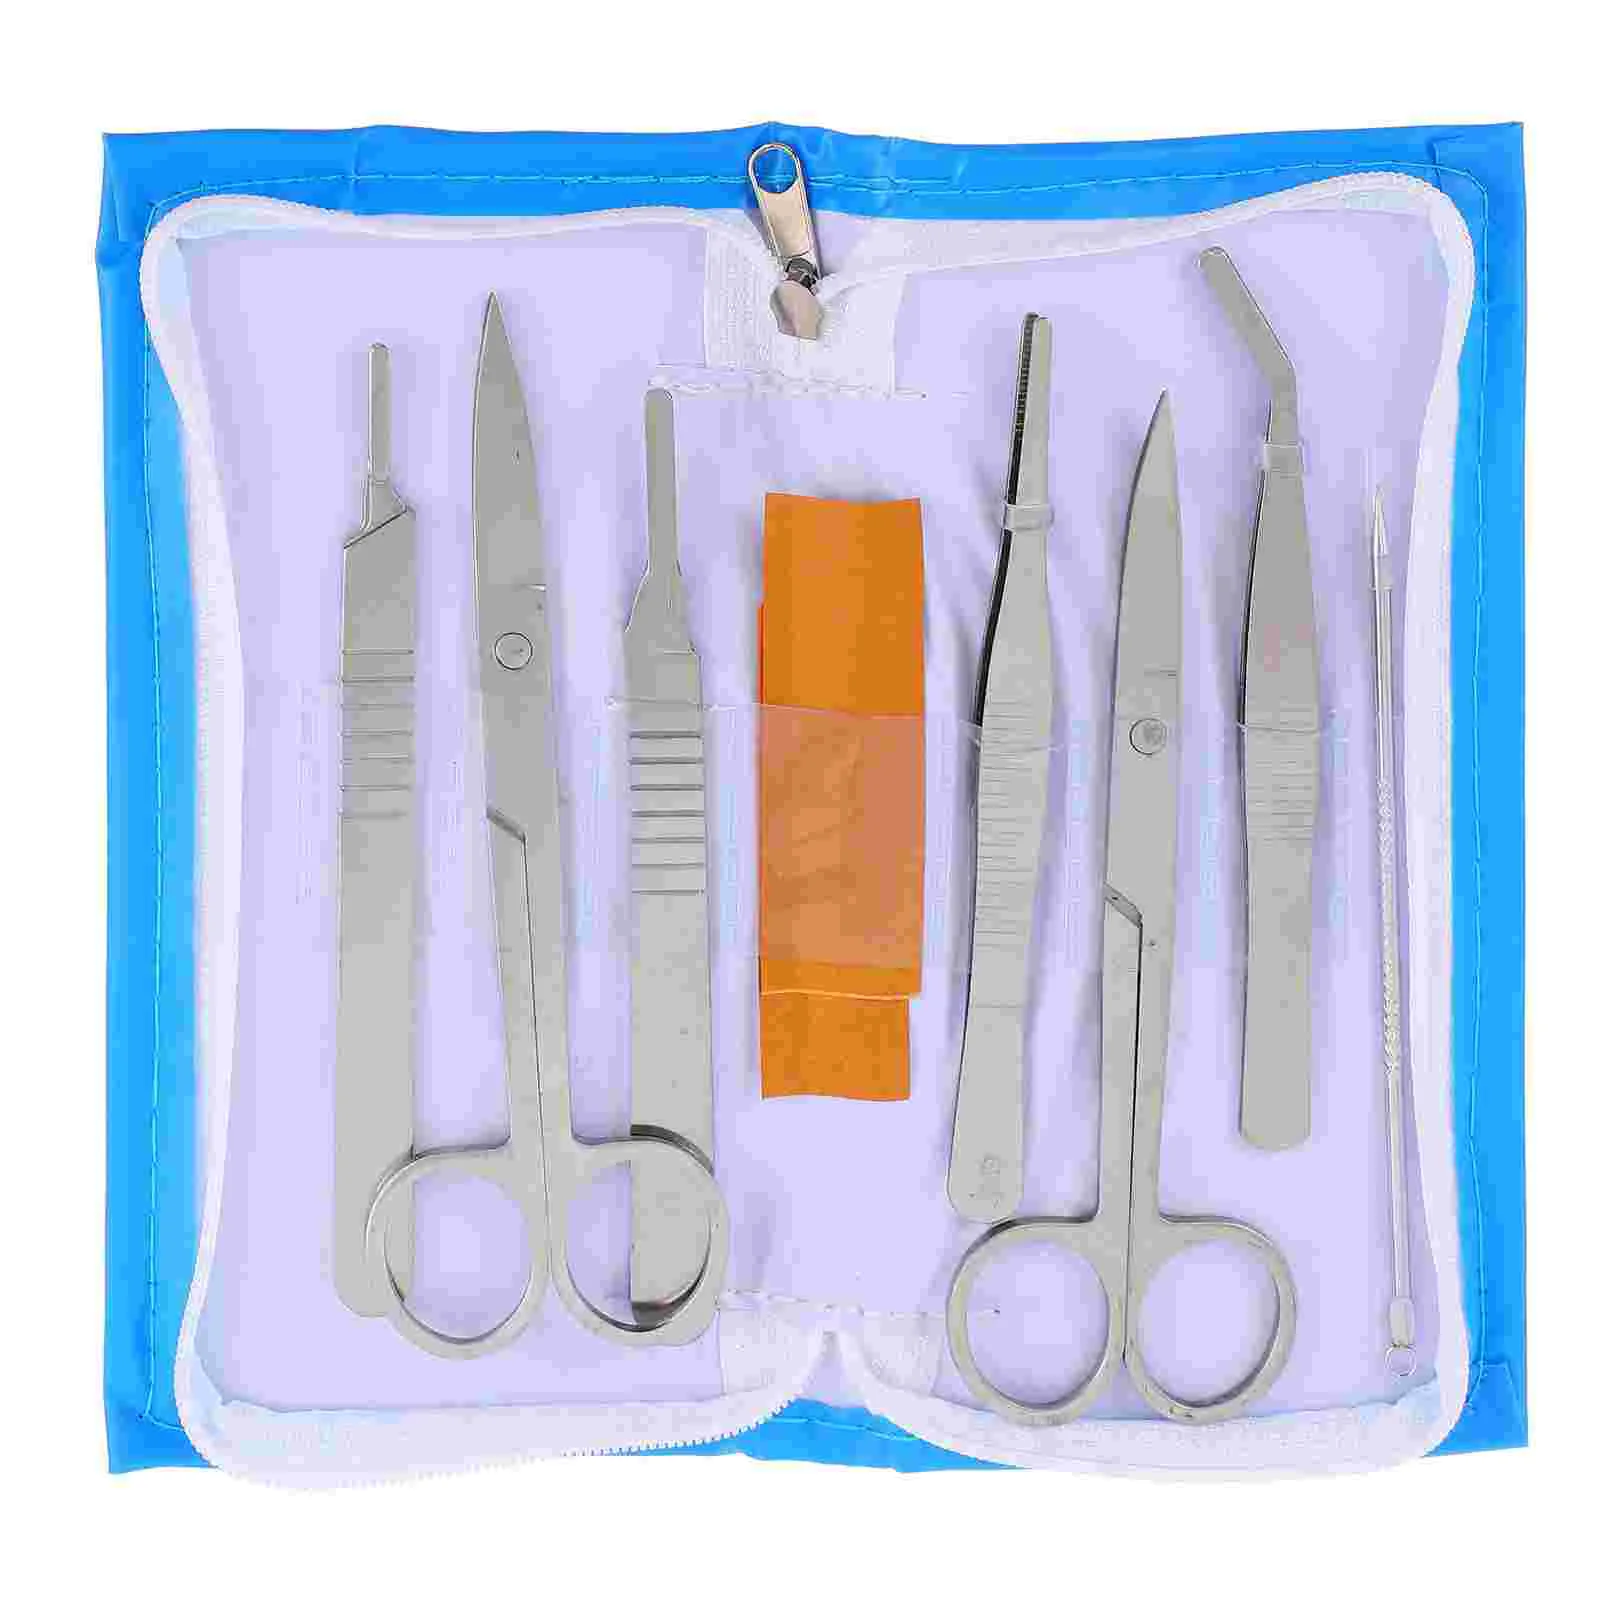 

Dissection Tools Stainless Steel Anatomical Laboratory Needle Scissors Biological Sample Anatomy Dissecting Kit